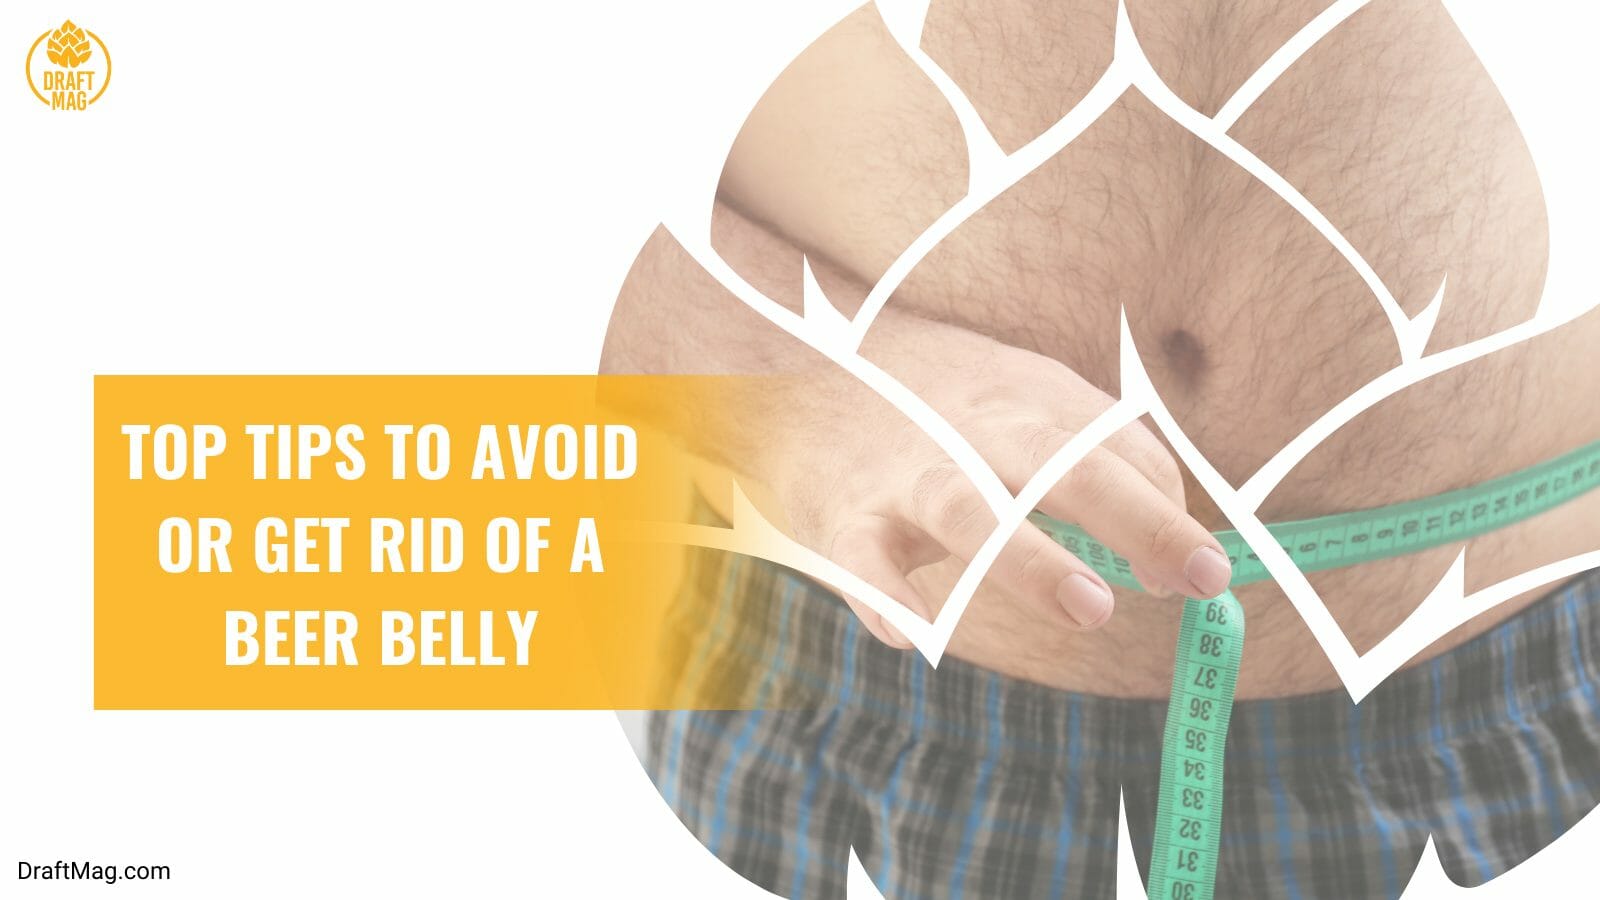 Top tips to avoid beer belly